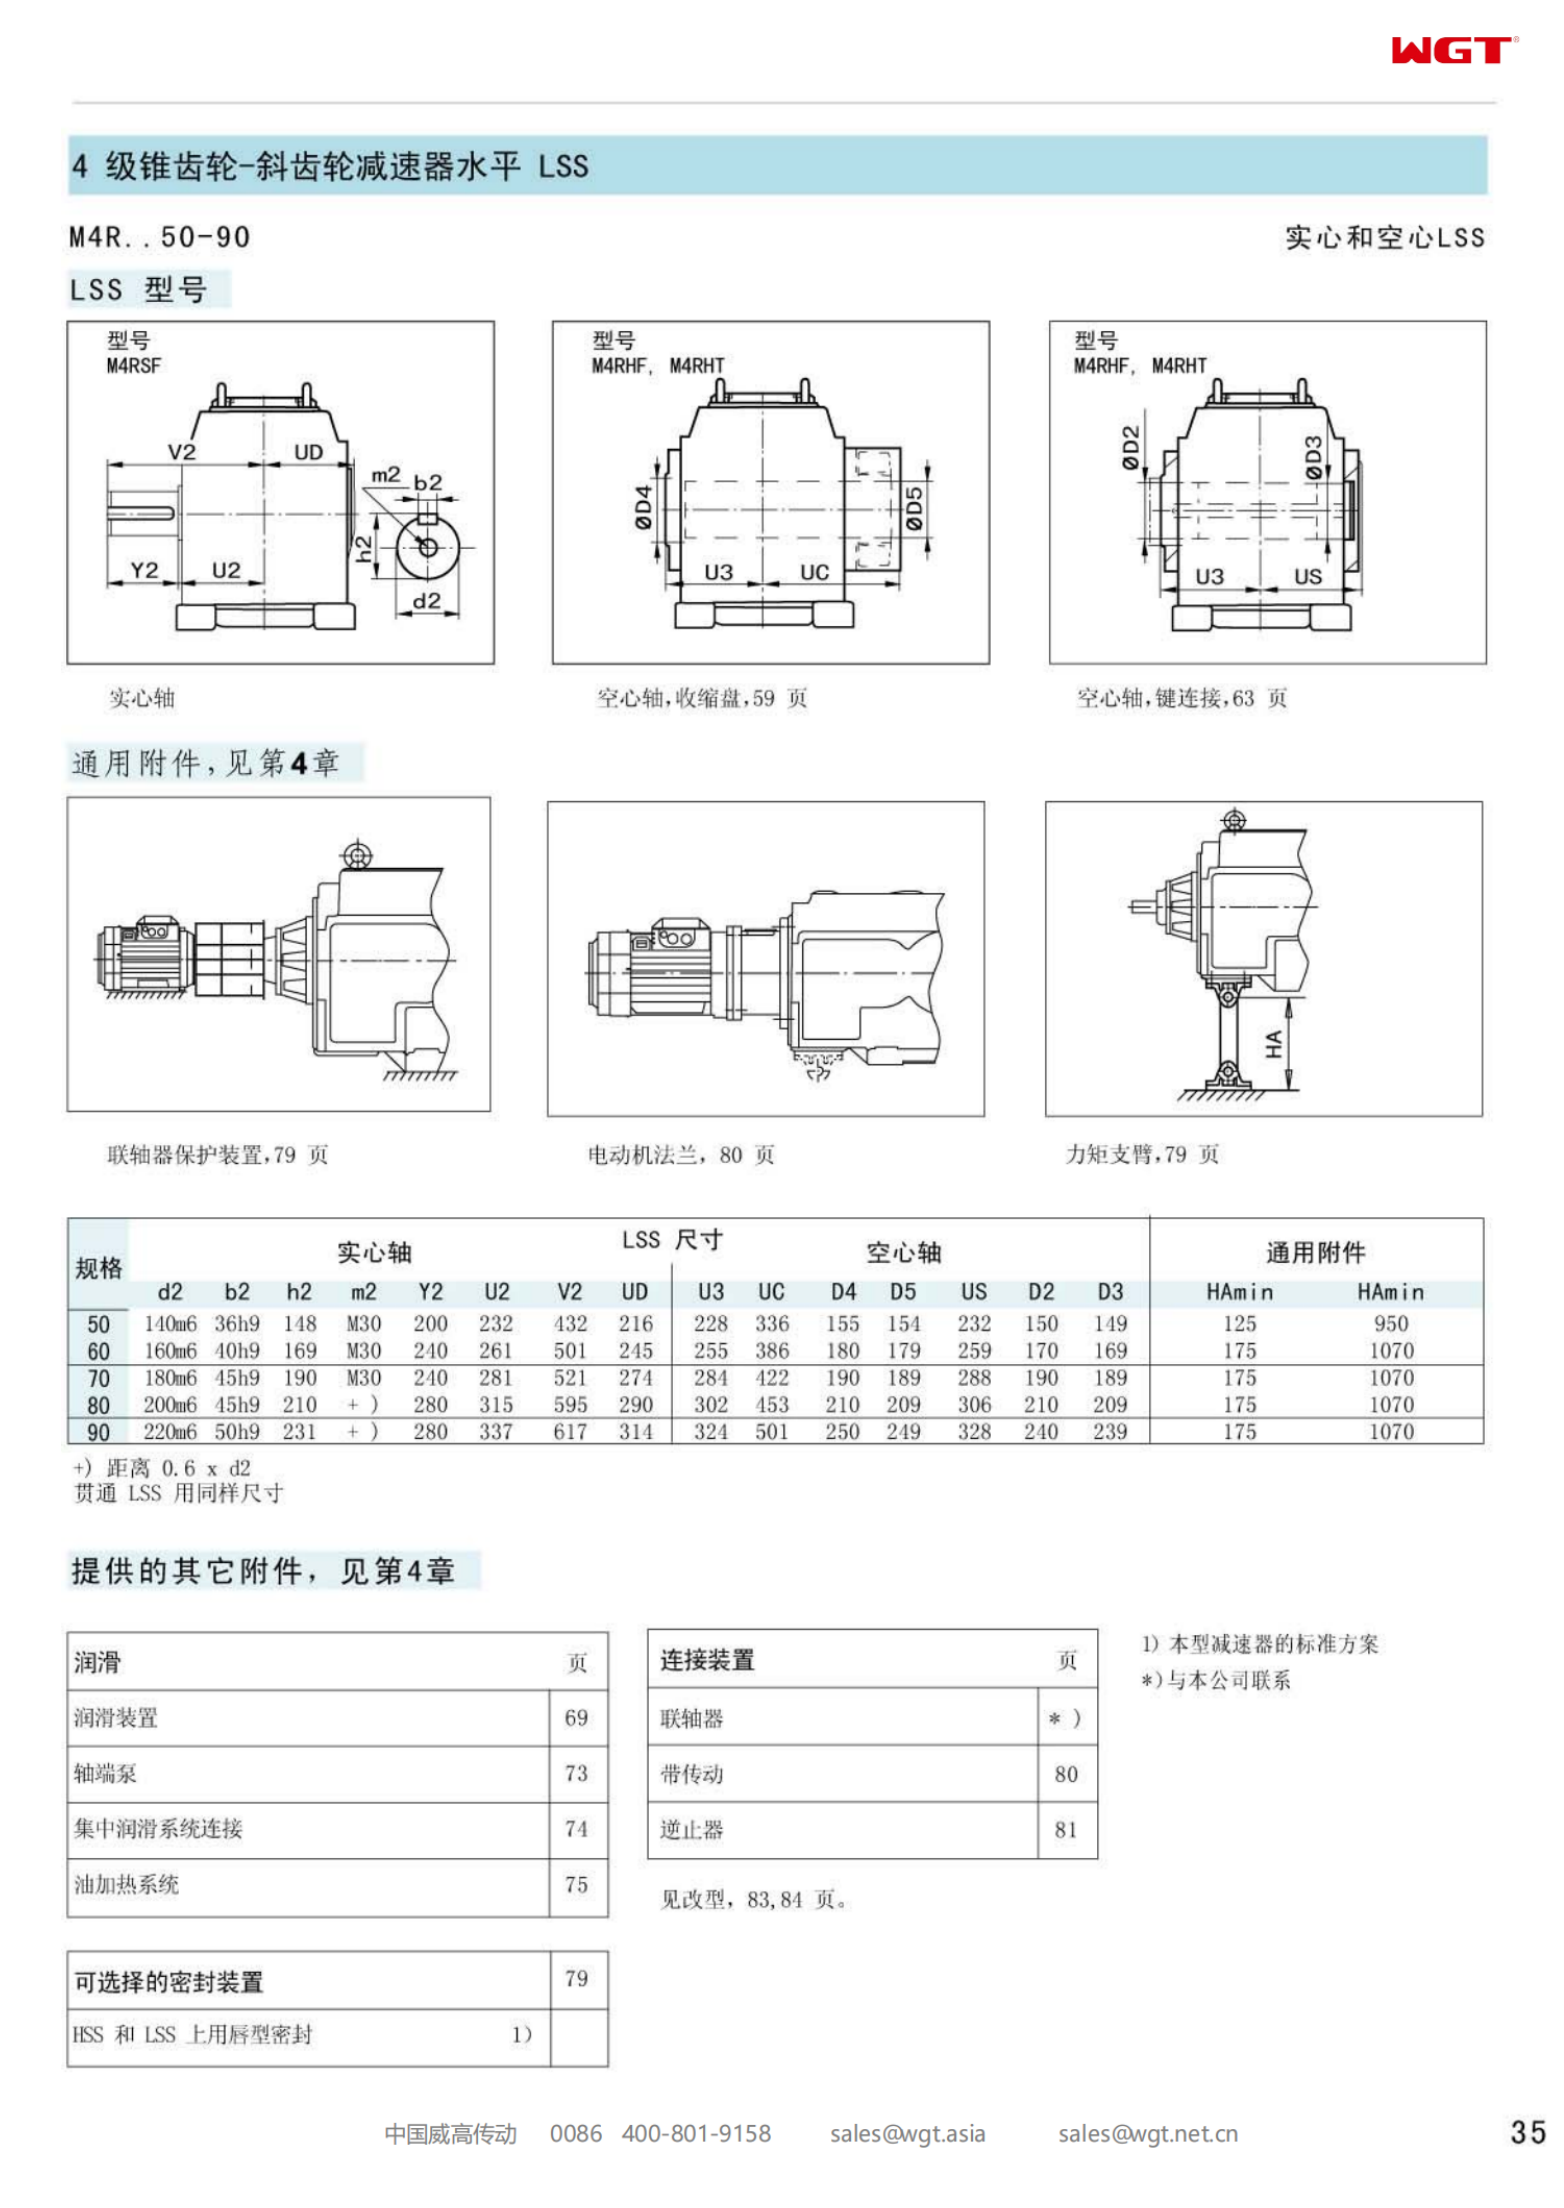 M4RHF60 Replace_SEW_M_Series Gearbox